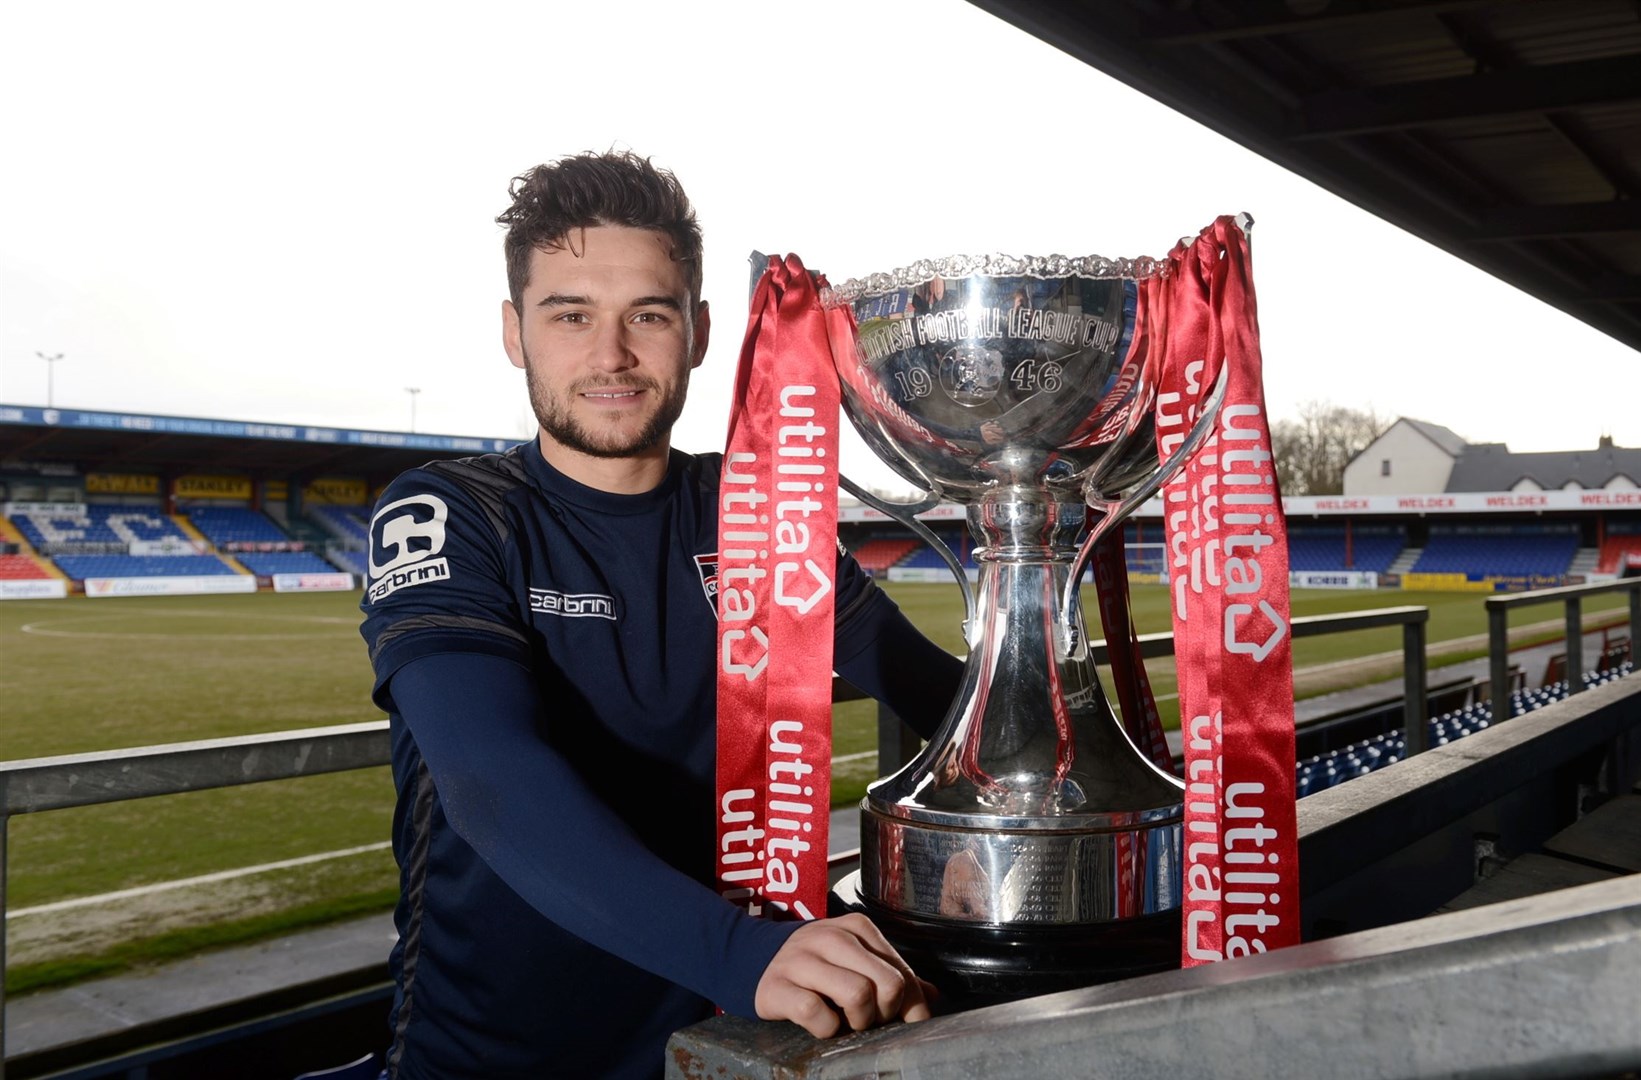 Former Ross County striker with the League Cup trophy, which he lifted in 2016.